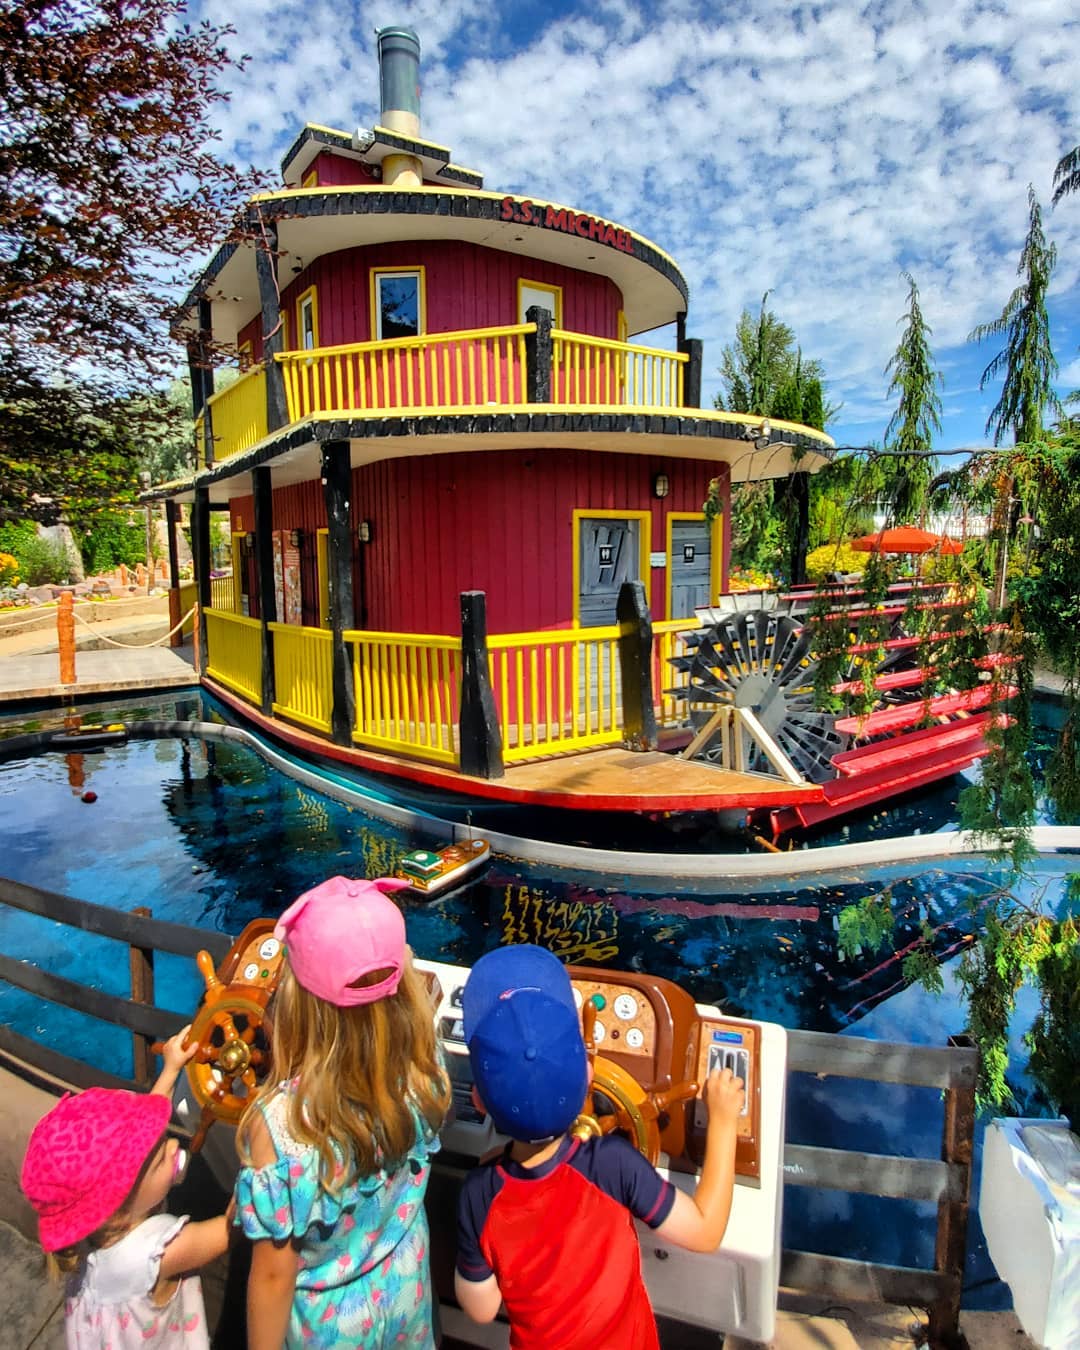 The old pedal boat at LocoLanding Adventure Park